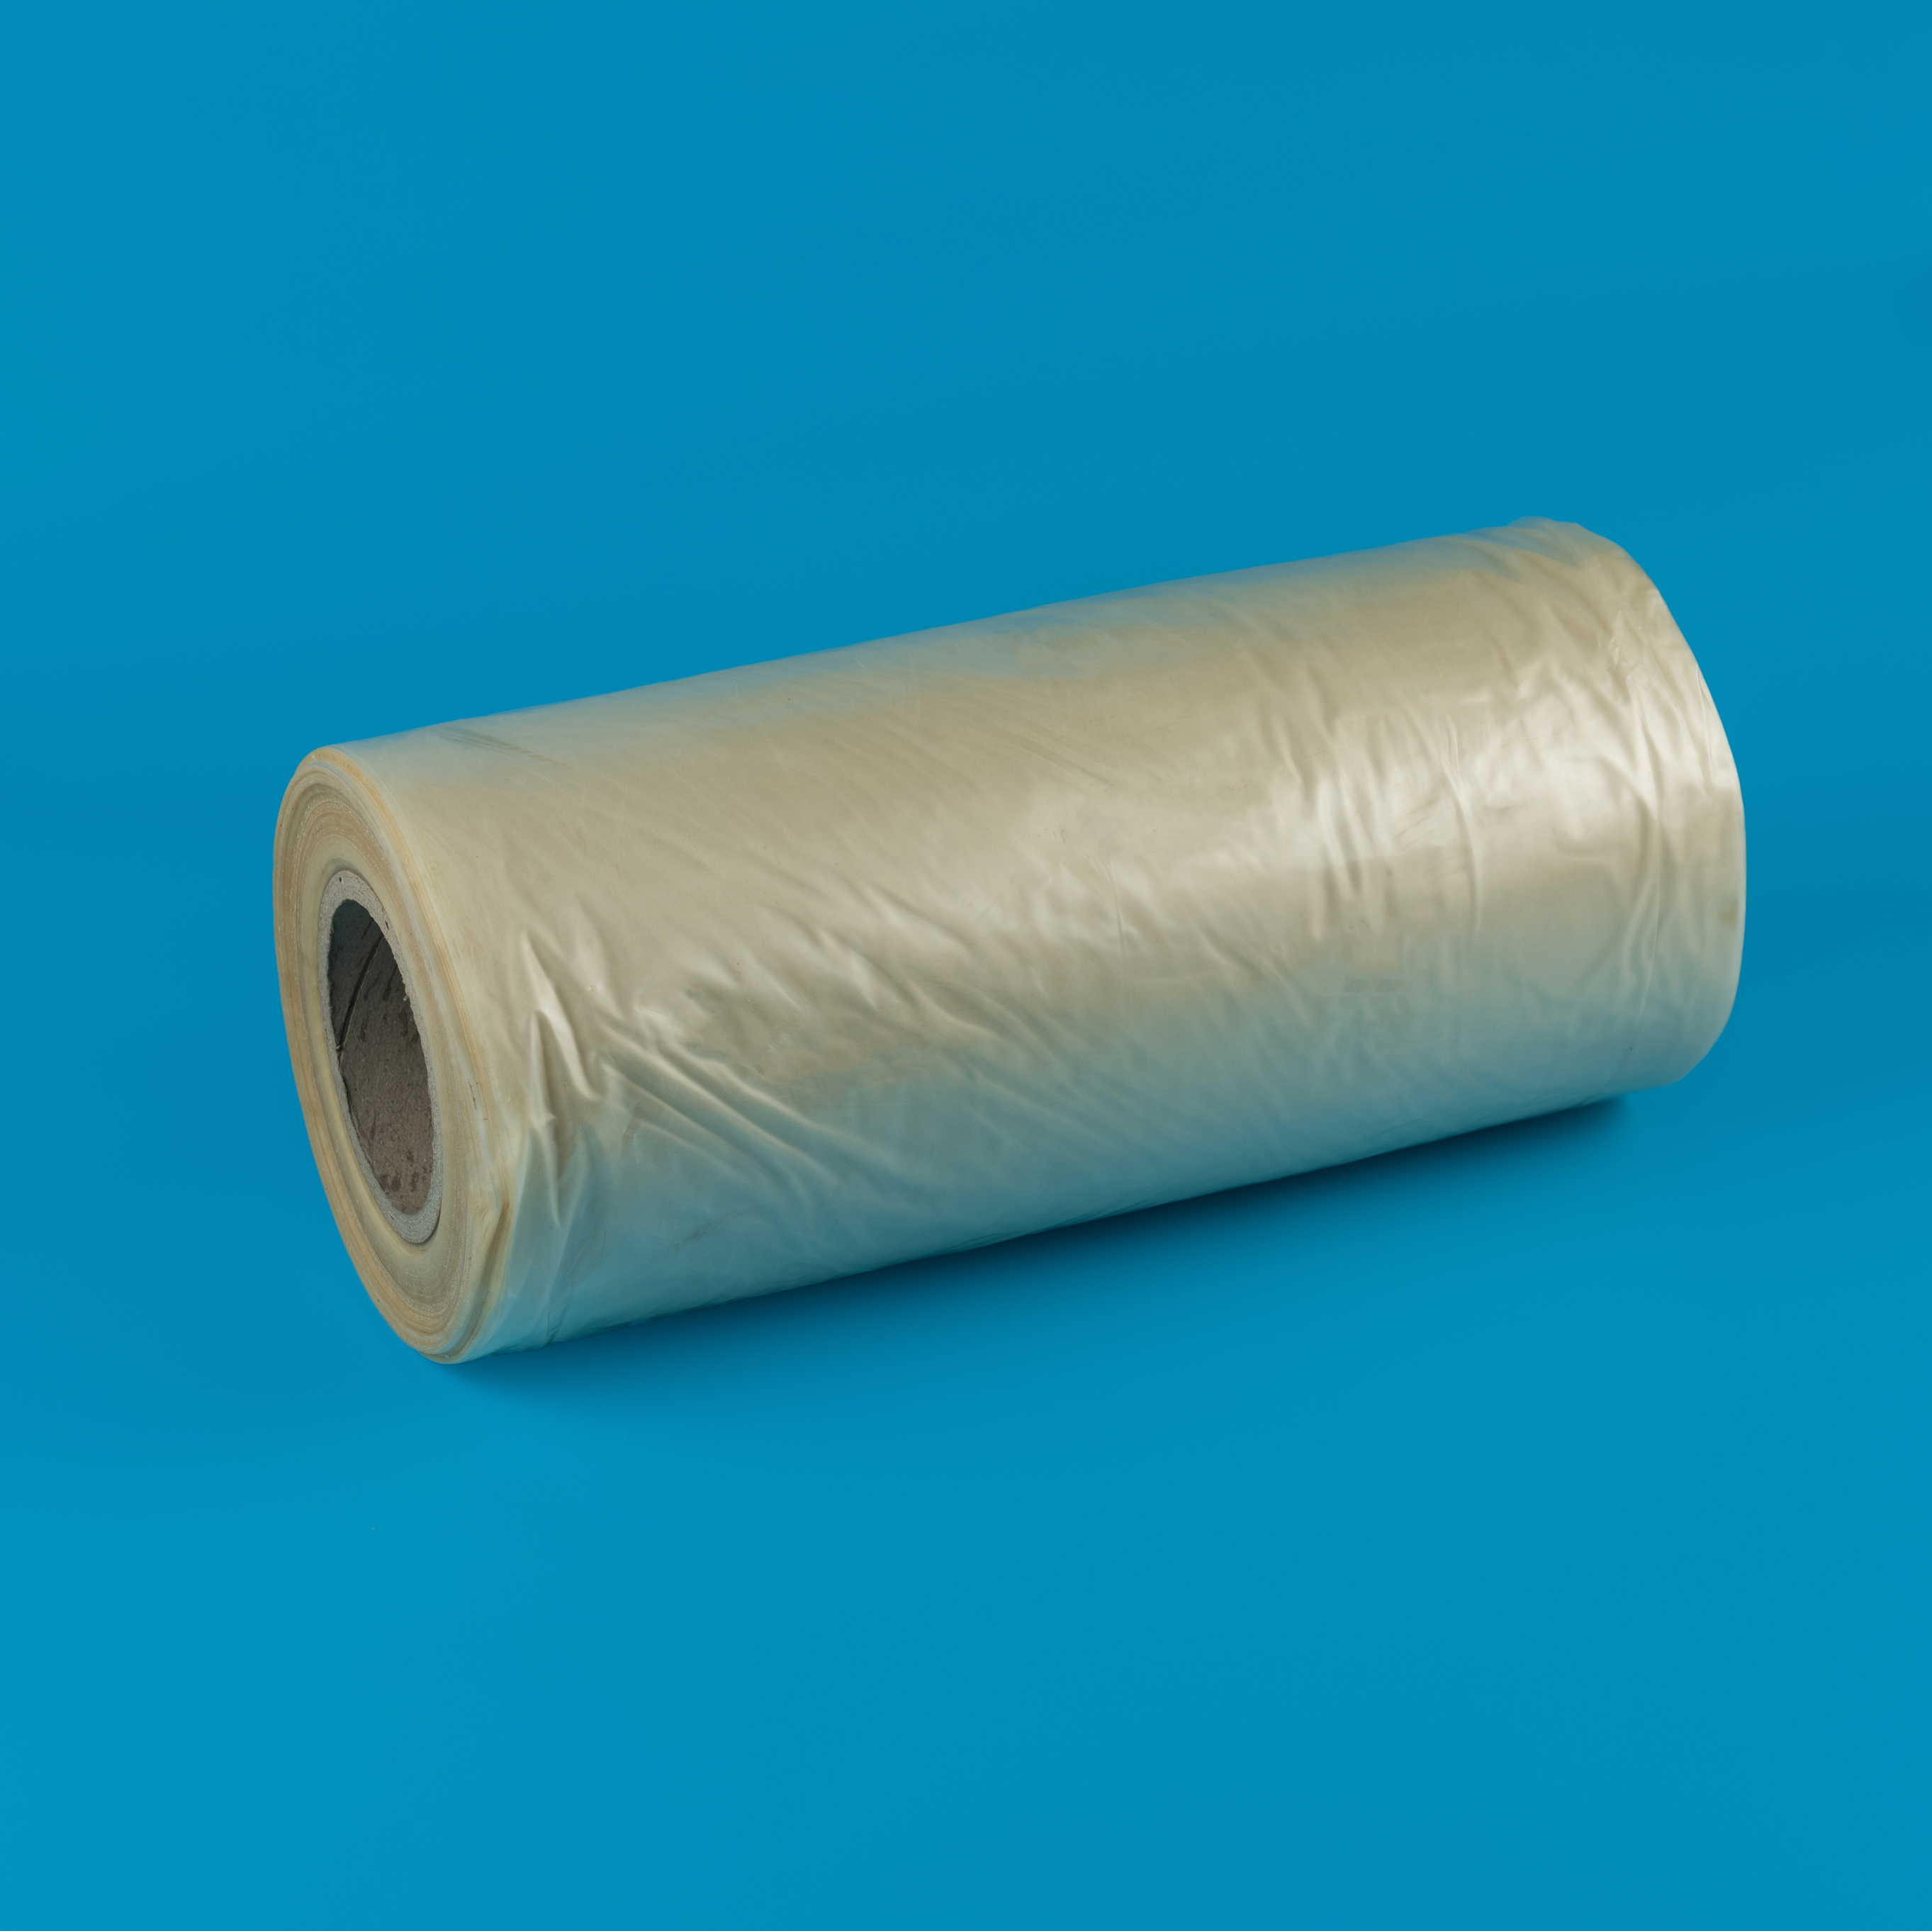 100% Biodegradable PVA Water Soluble Packaging Film Rolls